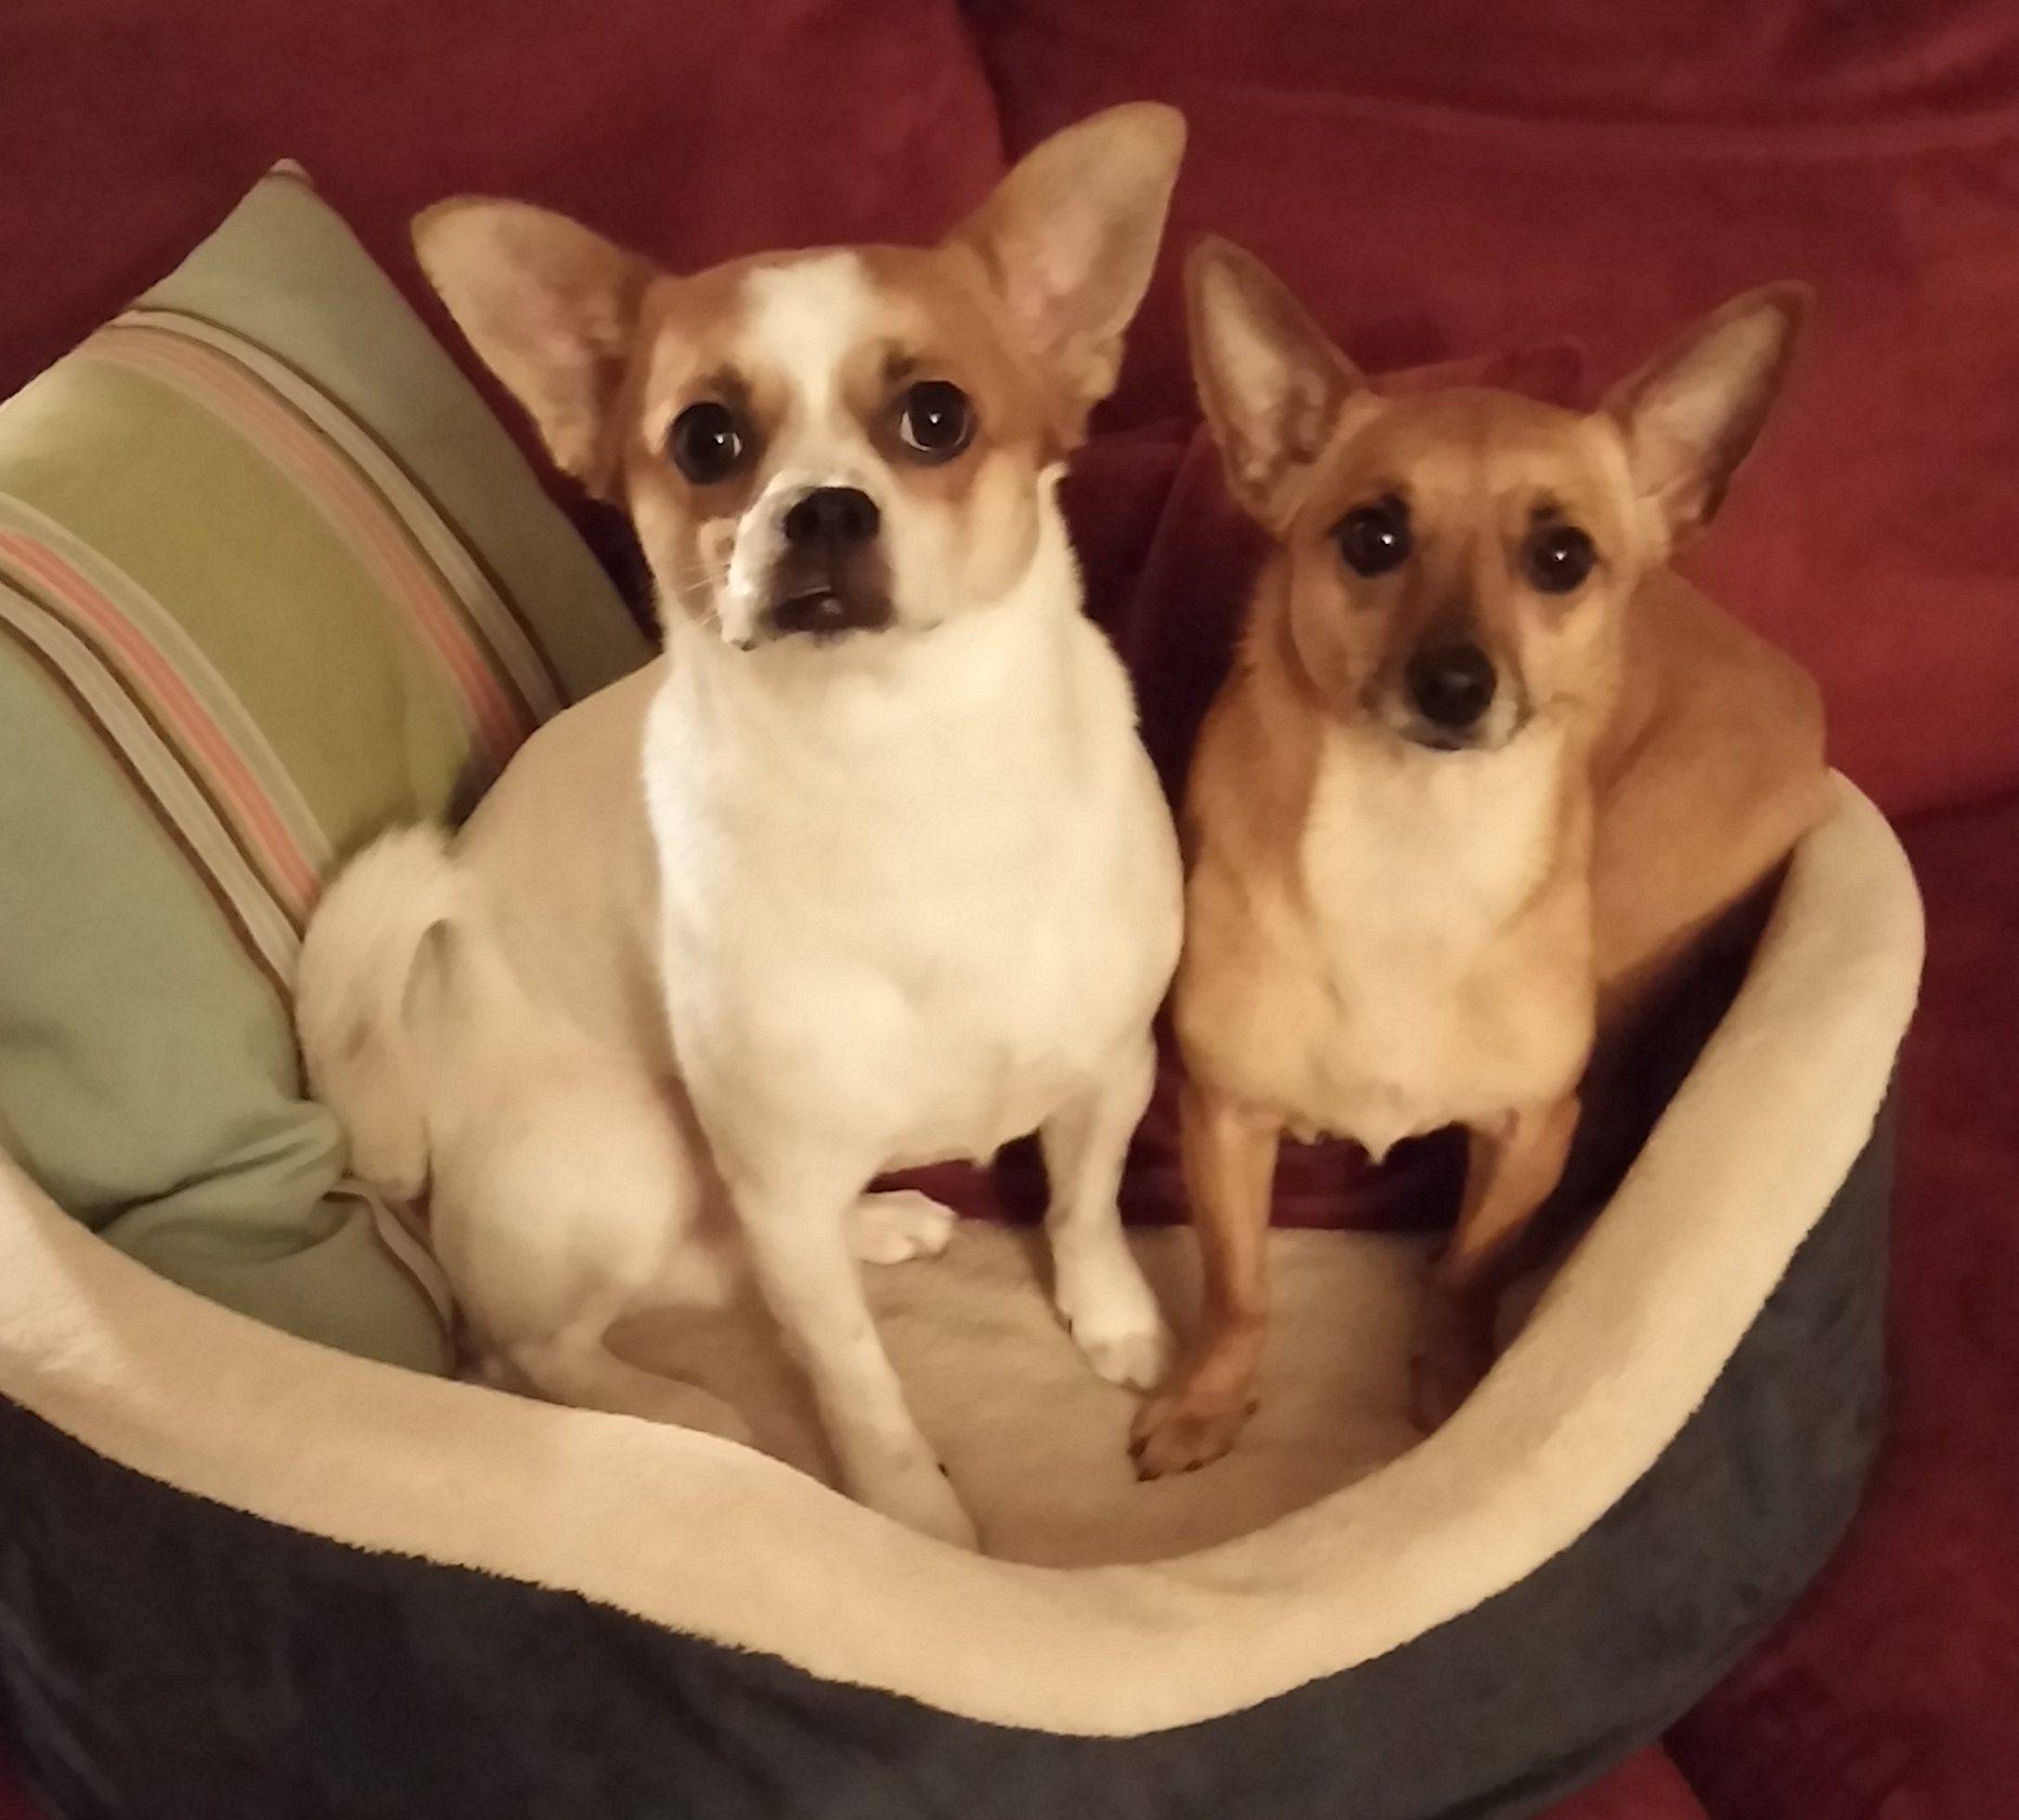 Tax and Peanut - Chihuahua JRT Dogs For Adoption in San Jose